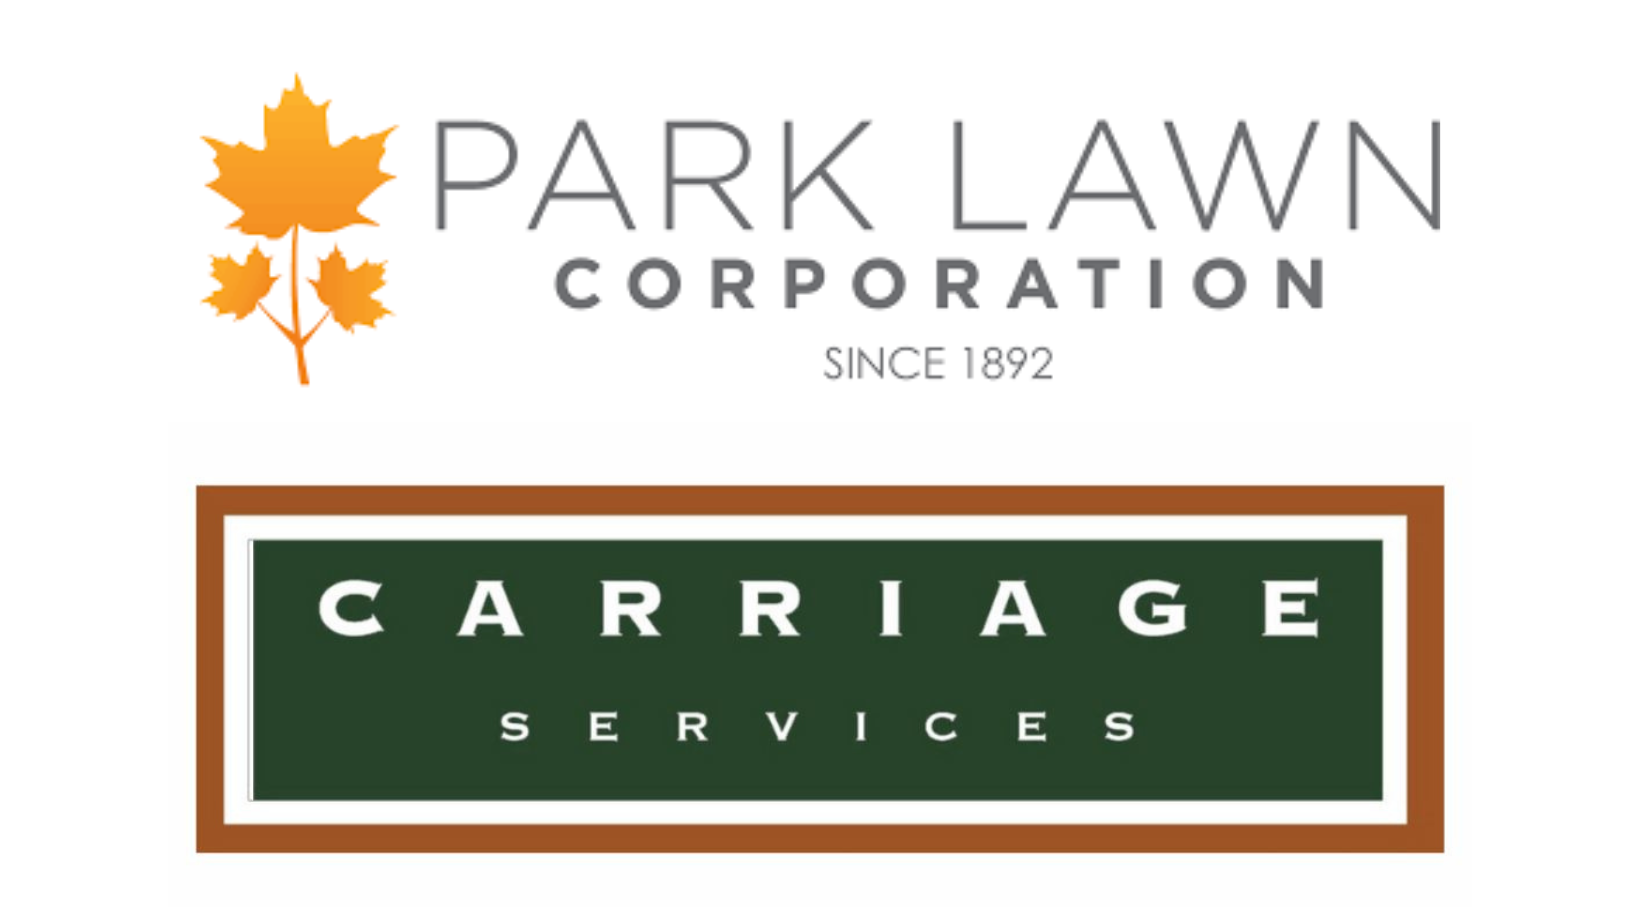 Park Lawn and Carriage Logos